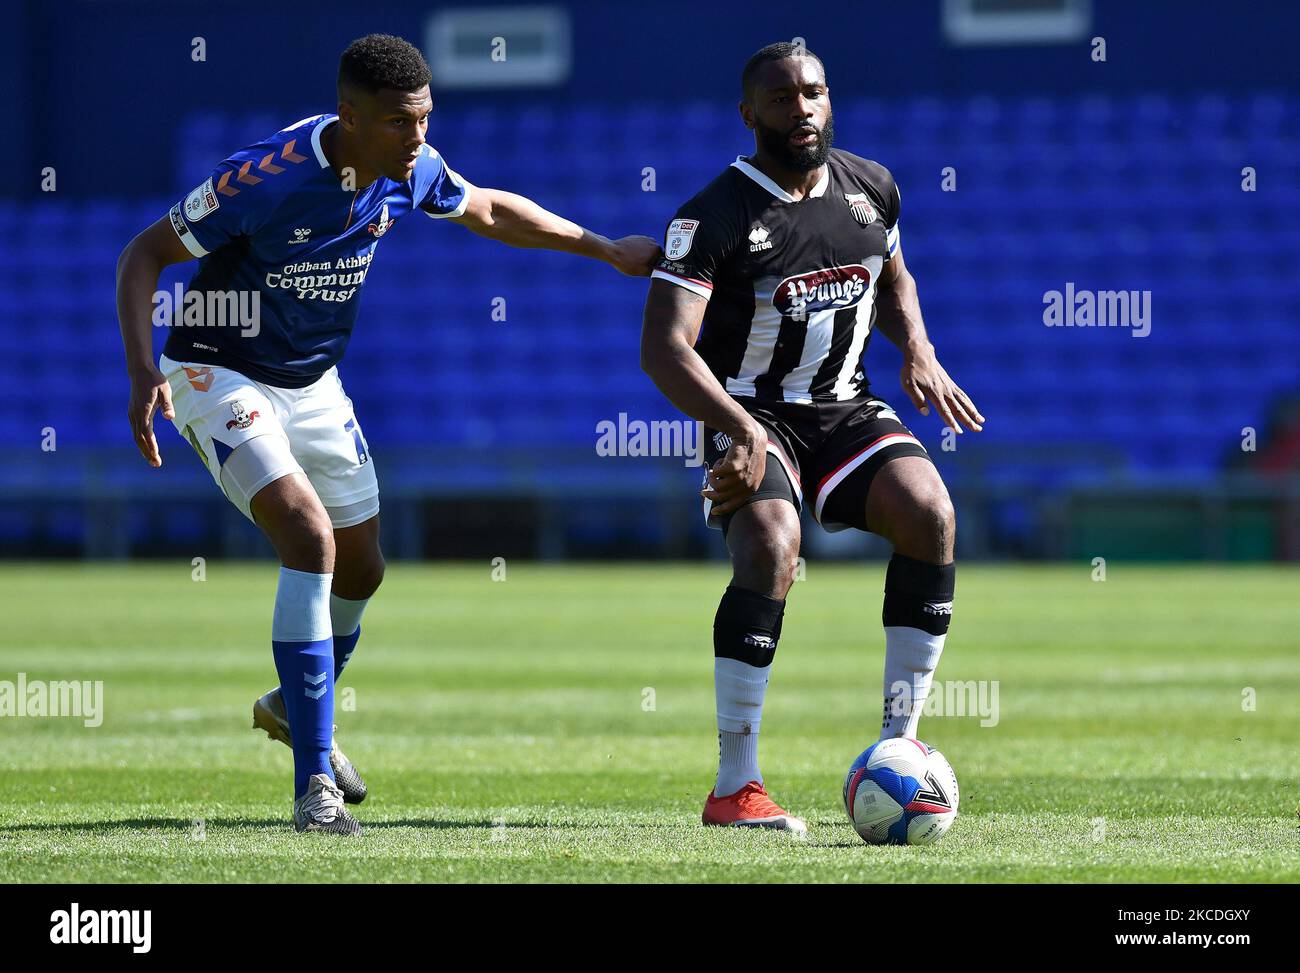 Oldham Athletic's Kyle Jameson tussles with Lenell John-Lewis of Grimsby Town during the Sky Bet League 2 match between Oldham Athletic and Grimsby Town at Boundary Park, Oldham, England on 24th April 2021. (Photo by Eddie Garvey/MI News/NurPhoto) Stock Photo